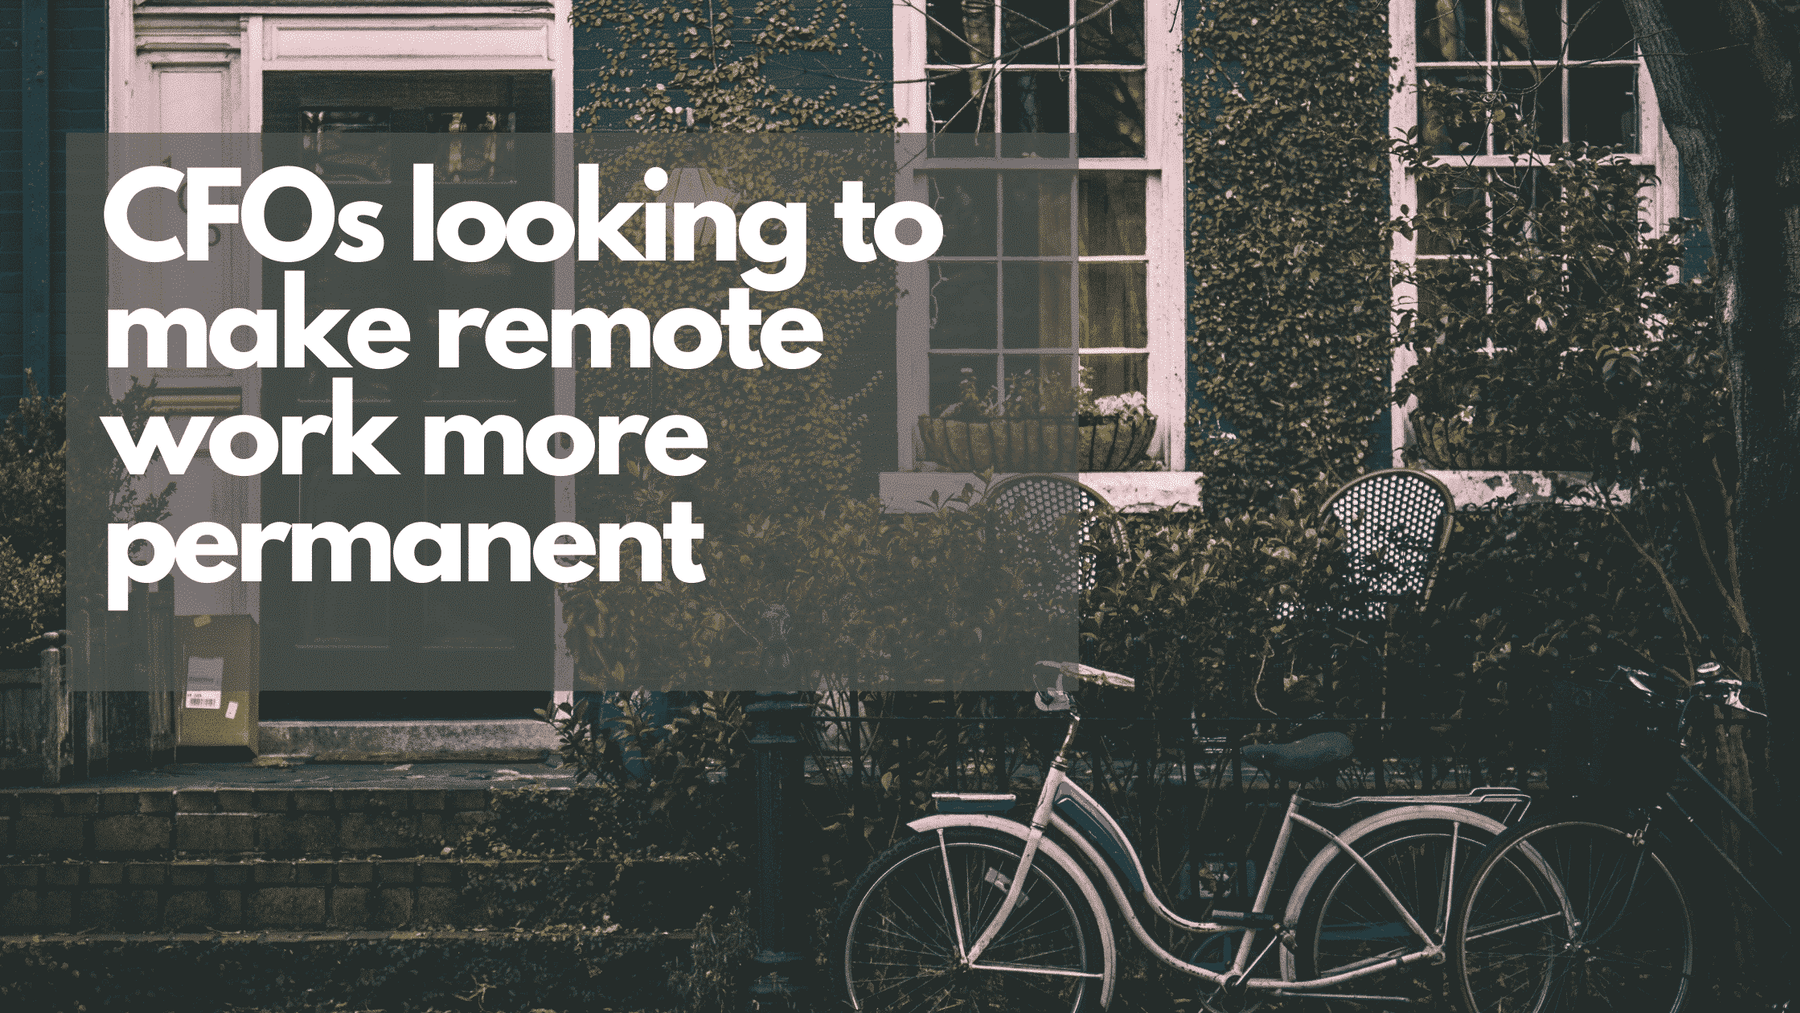 CFOs looking to make remote work more permanent following COVID-19